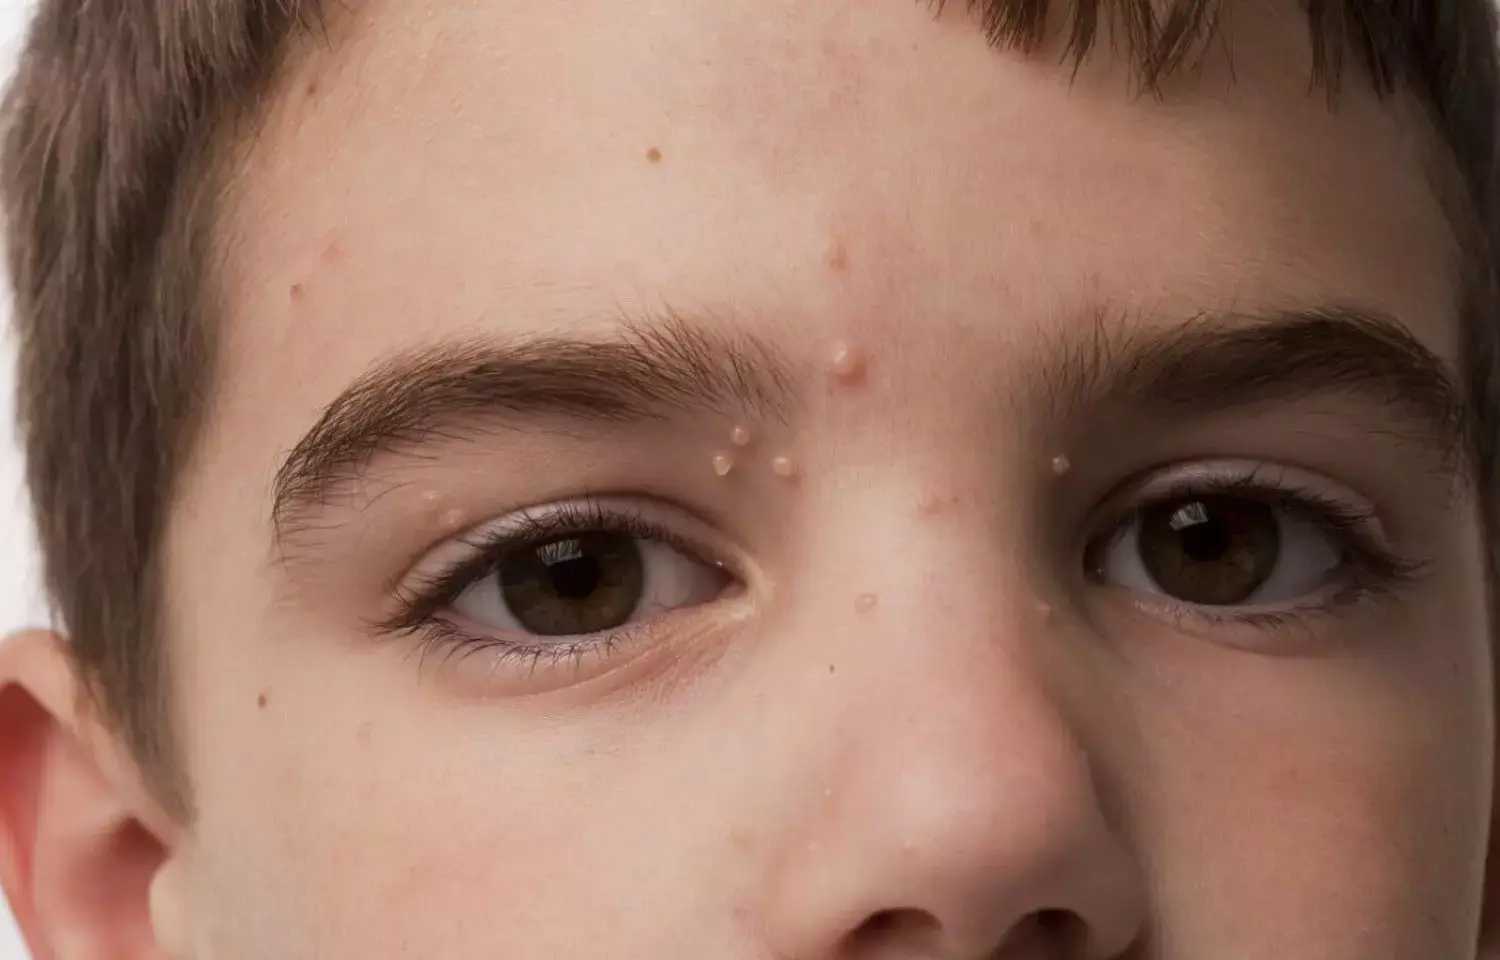 Once daily Topical berdazimer a novel approach for treating Molluscum contagiosum: JAMA